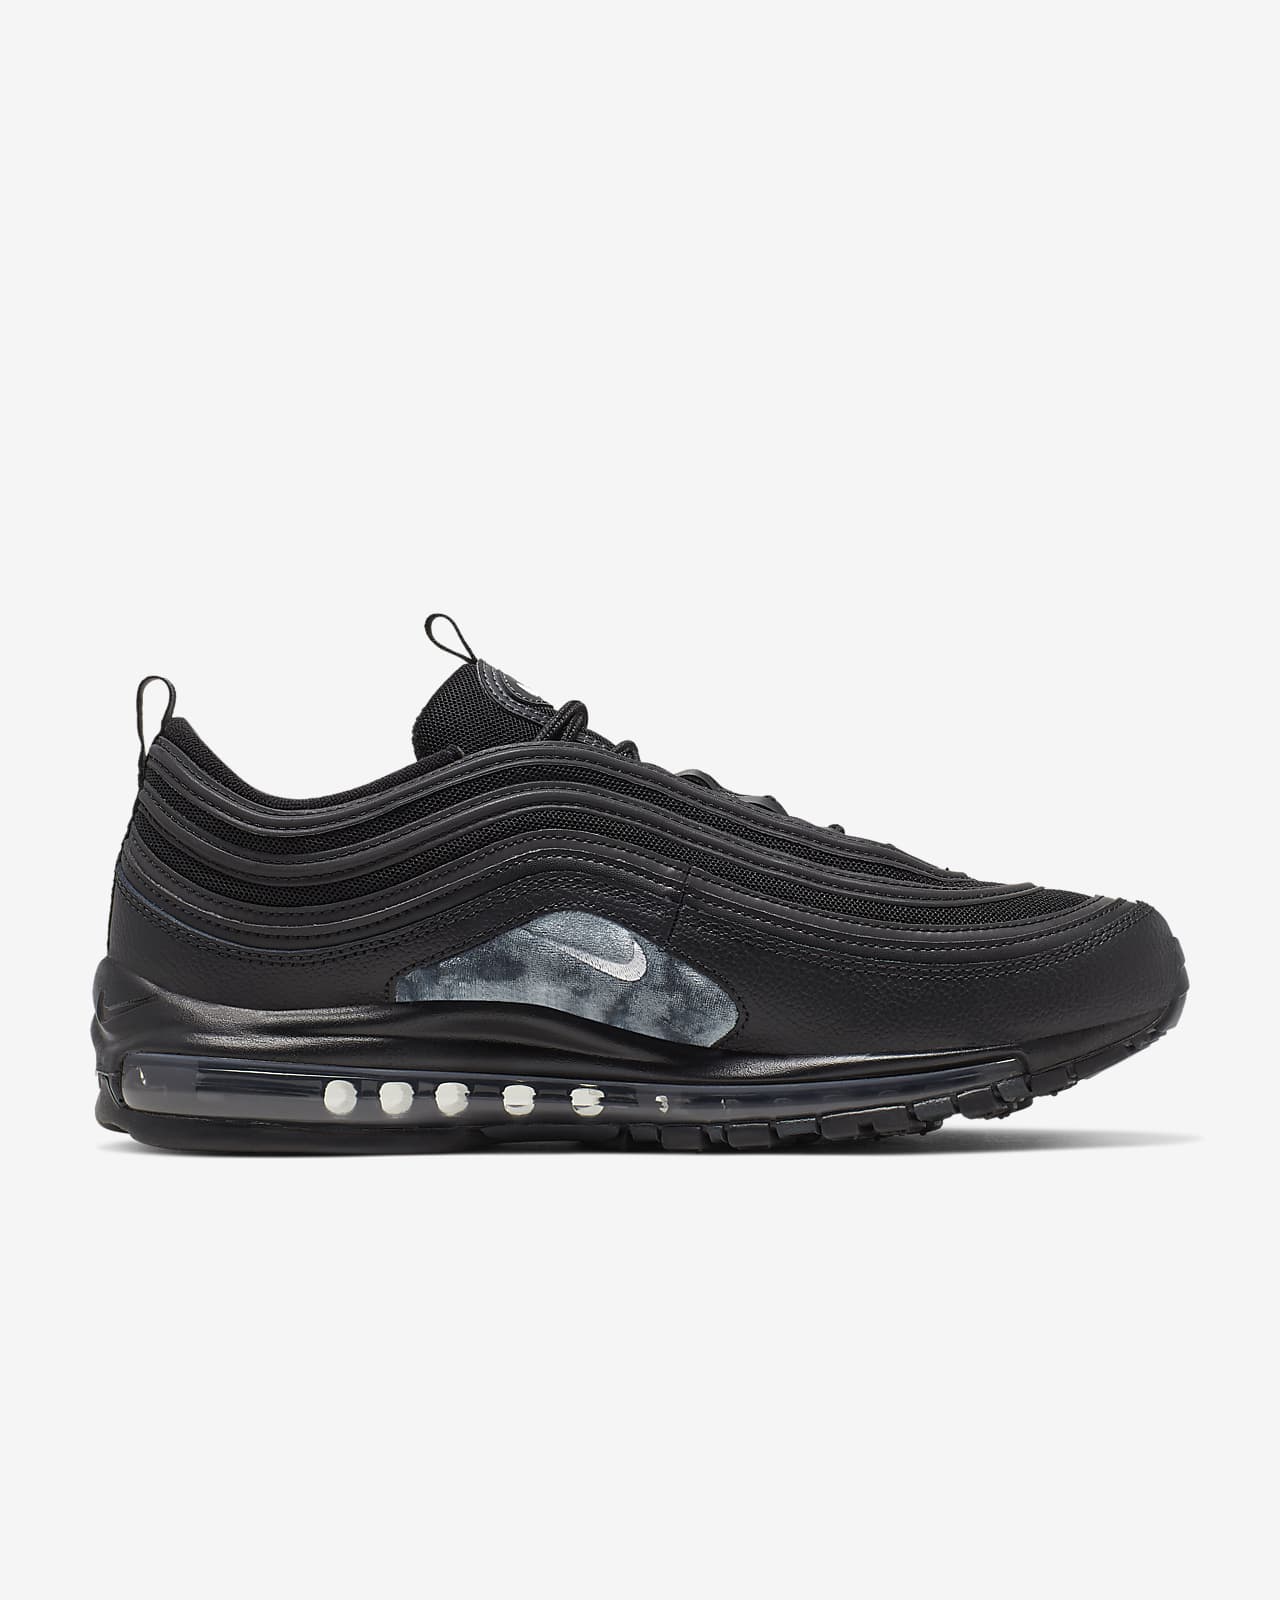 nike air max 97 fit true to size